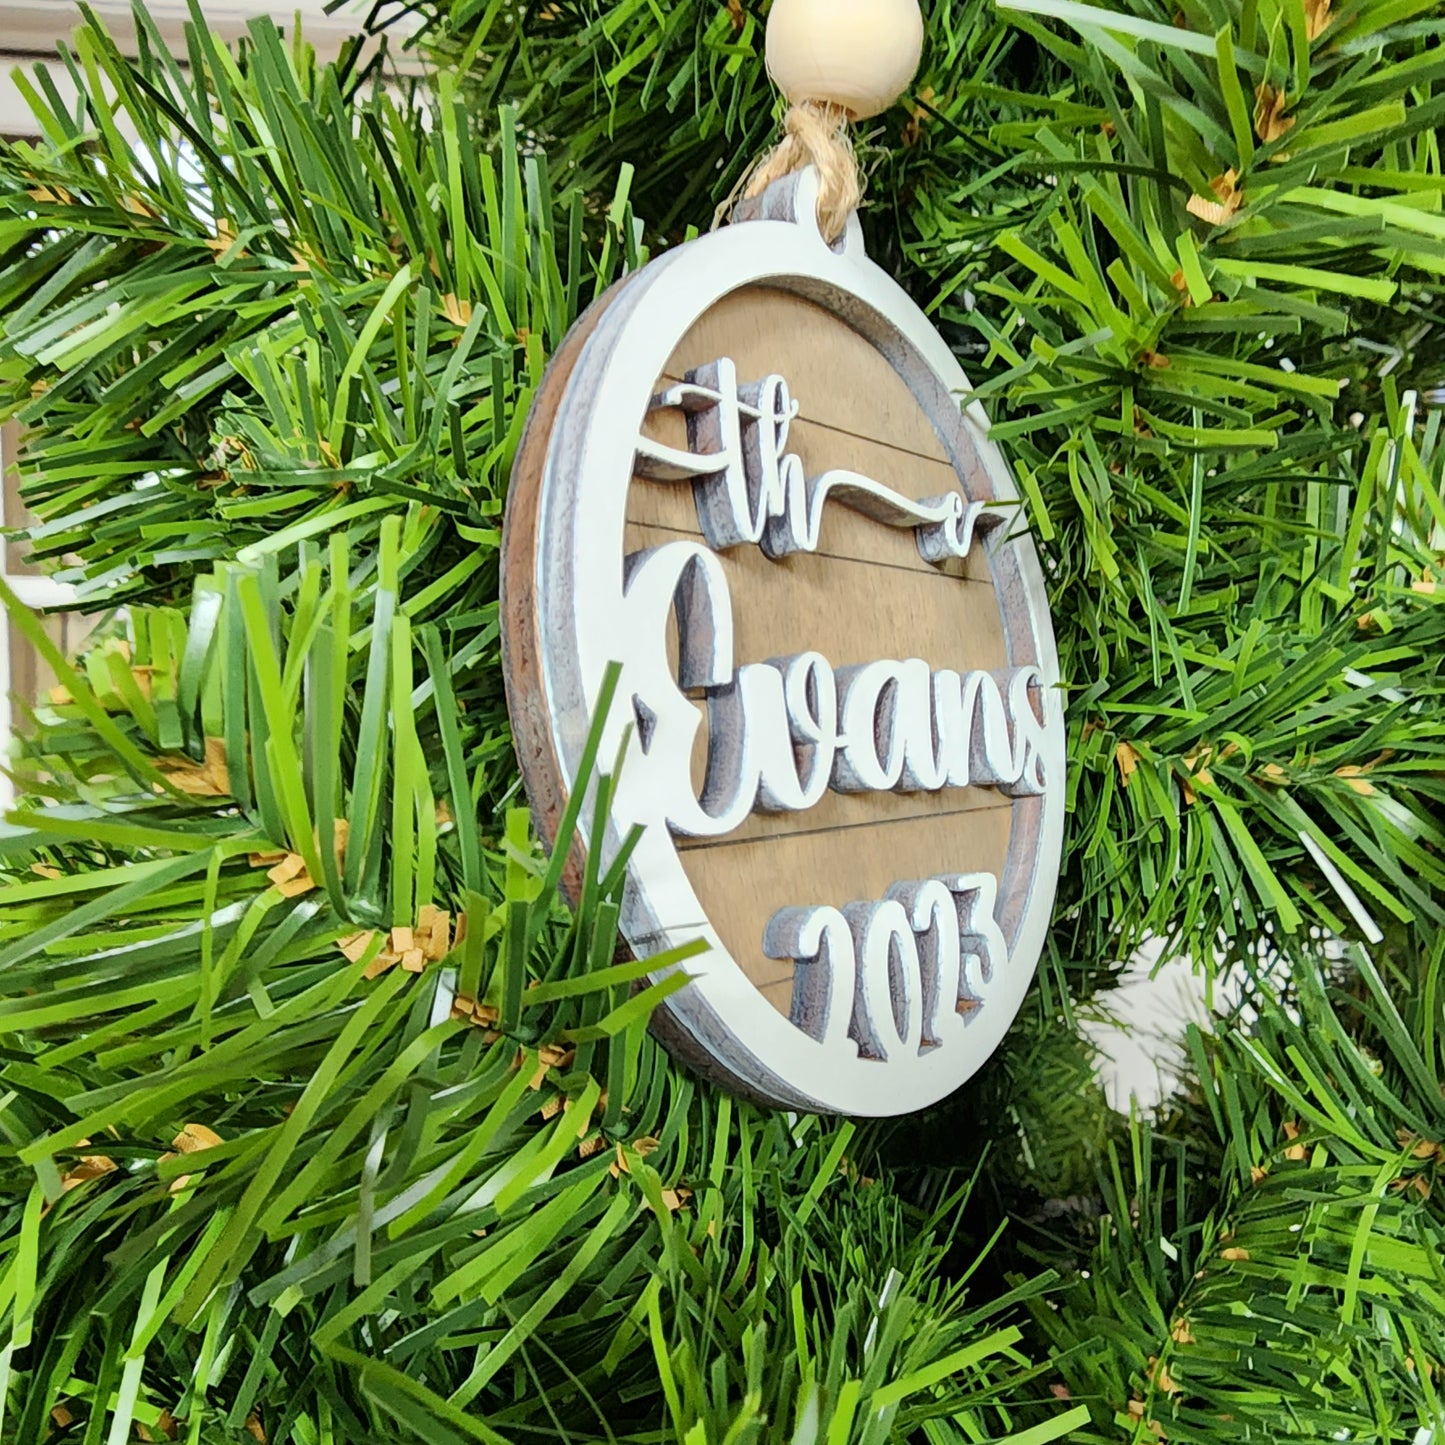 Christmas ornament with last name 2023